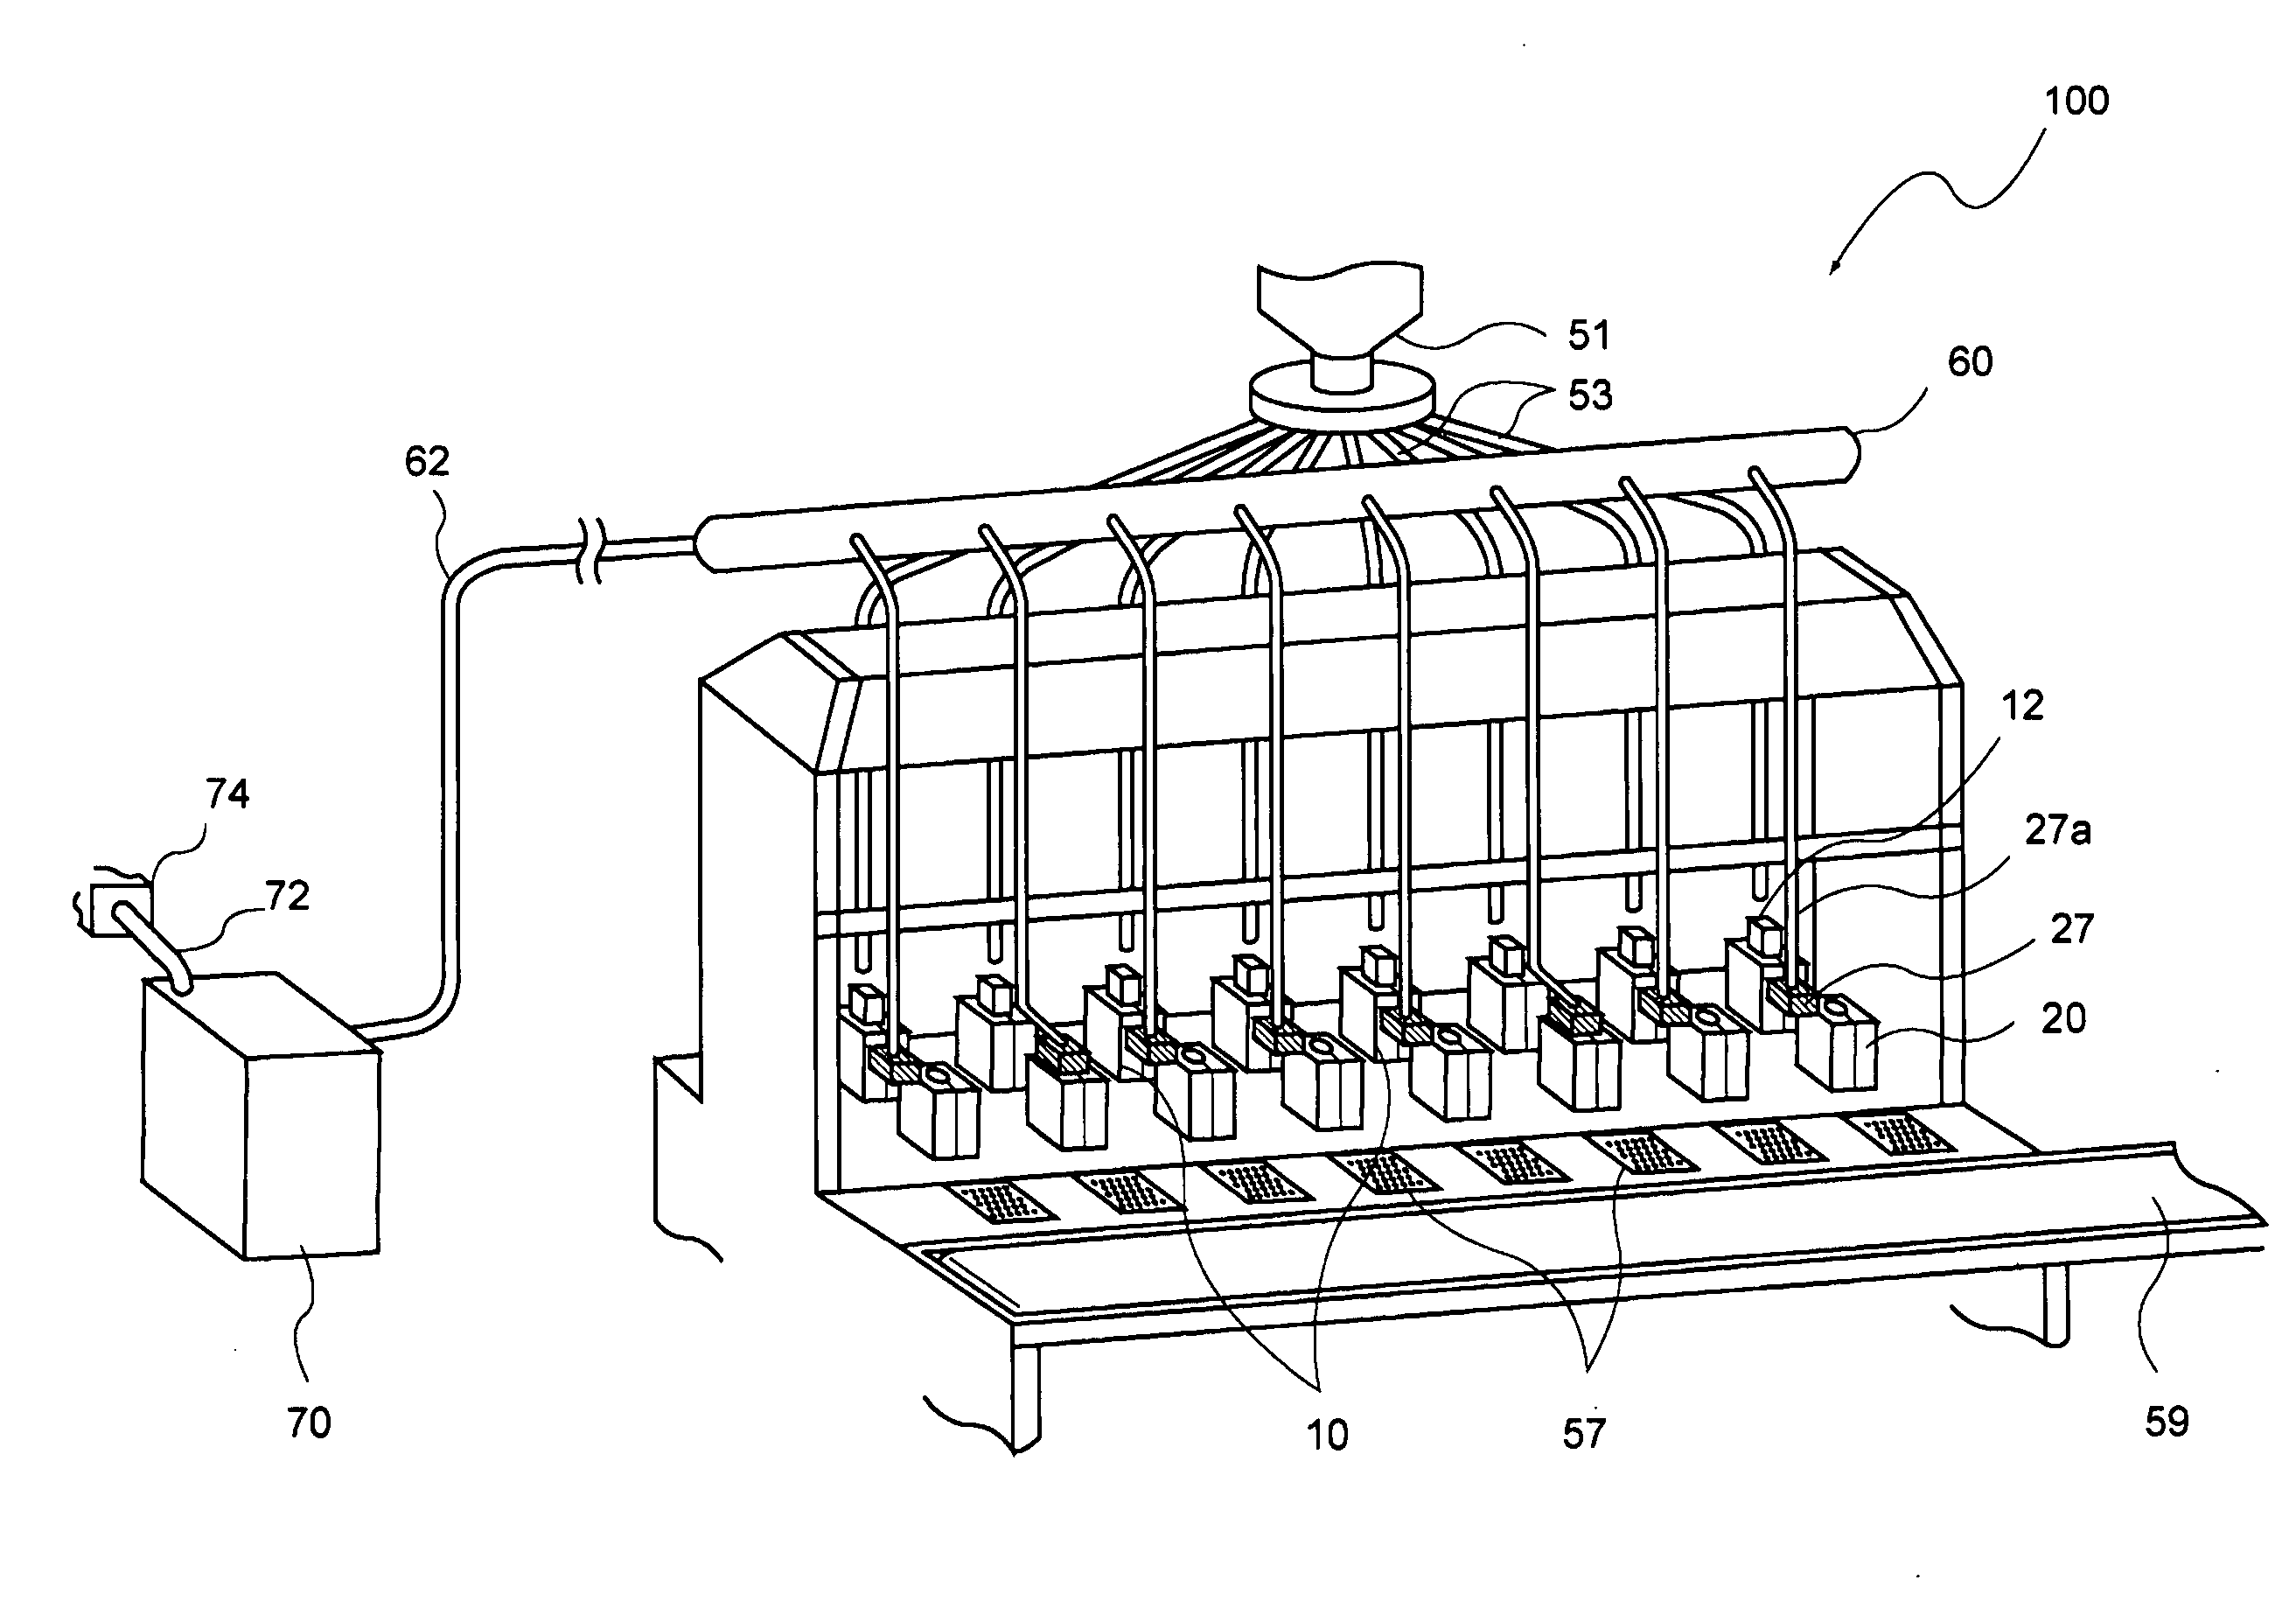 One-press method for producing glass vessel